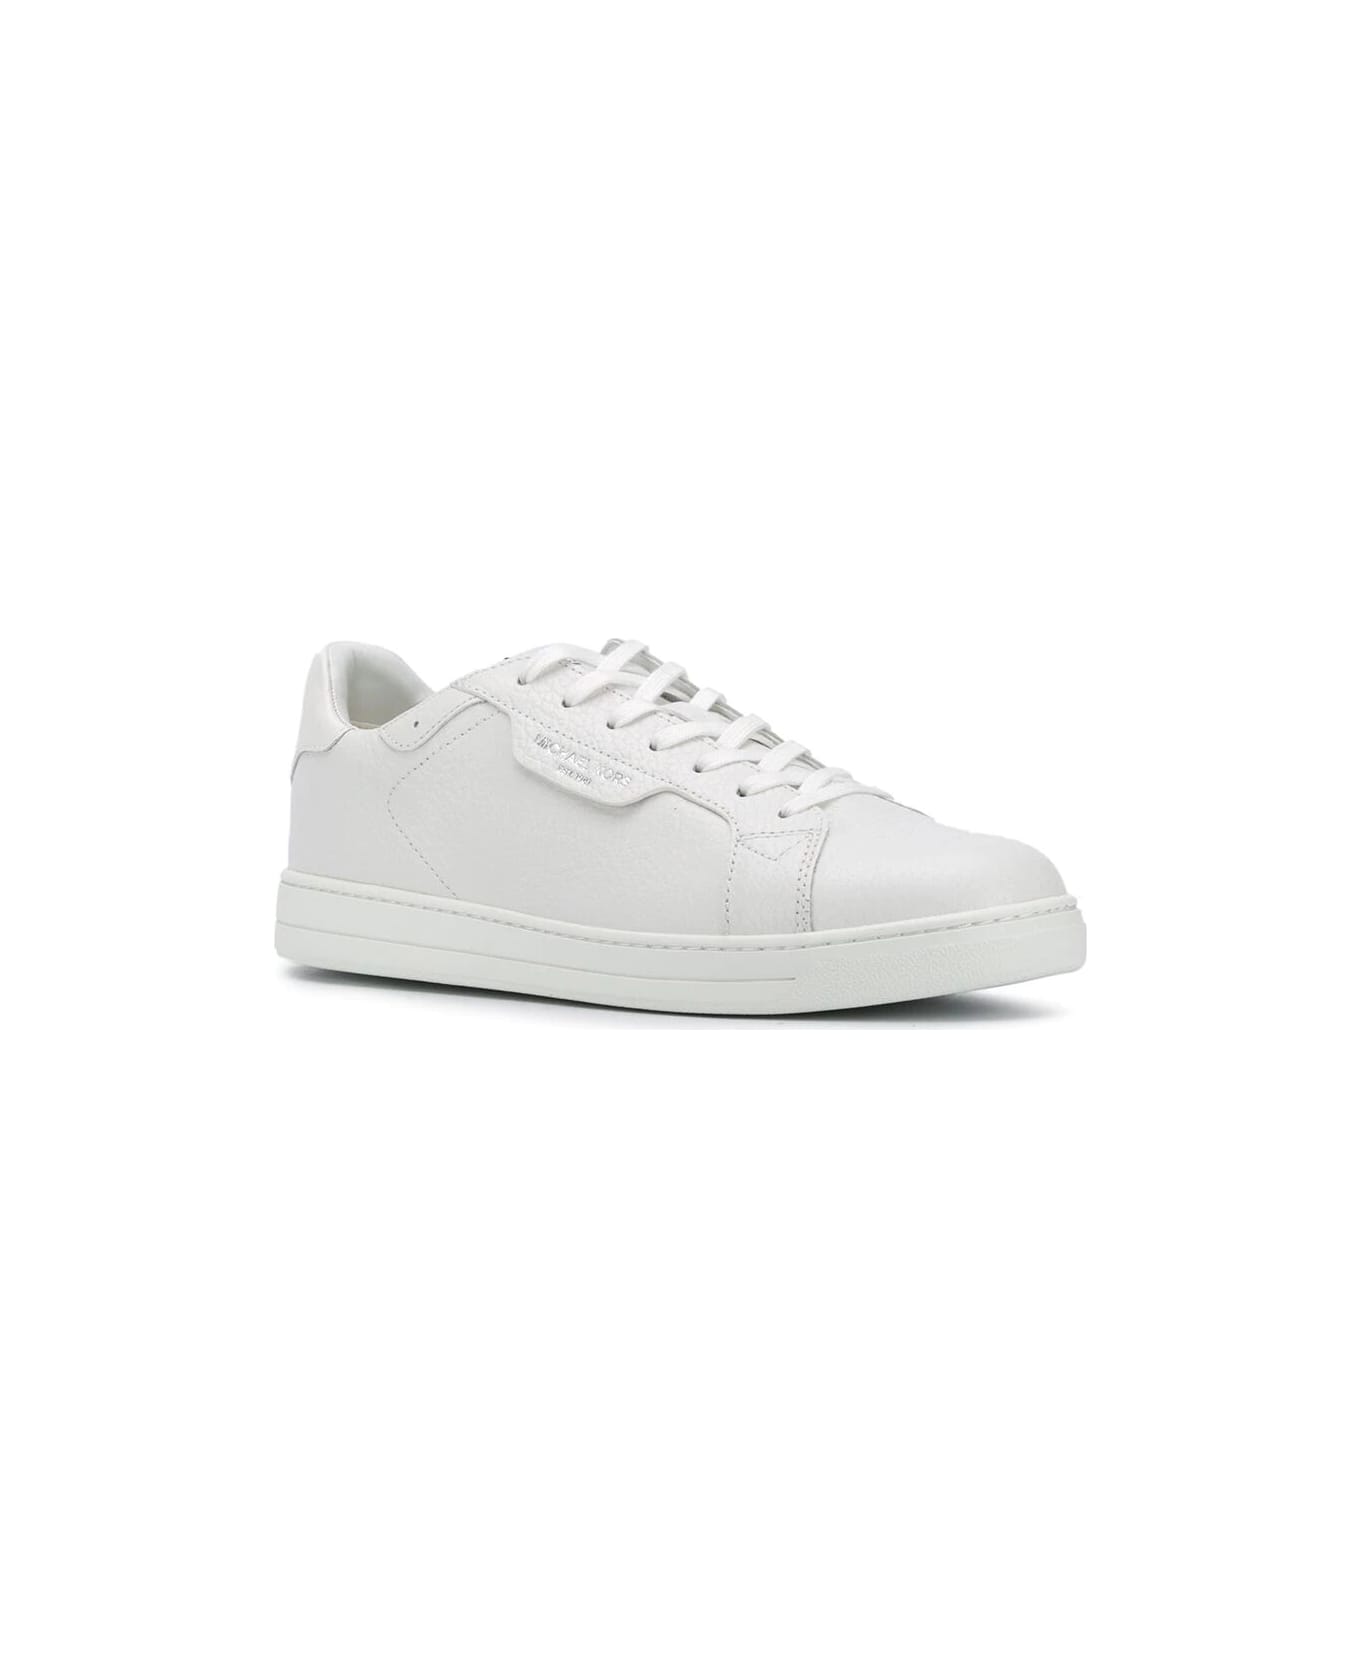 Michael Kors Keating Lace-up Sneakers - Optical White